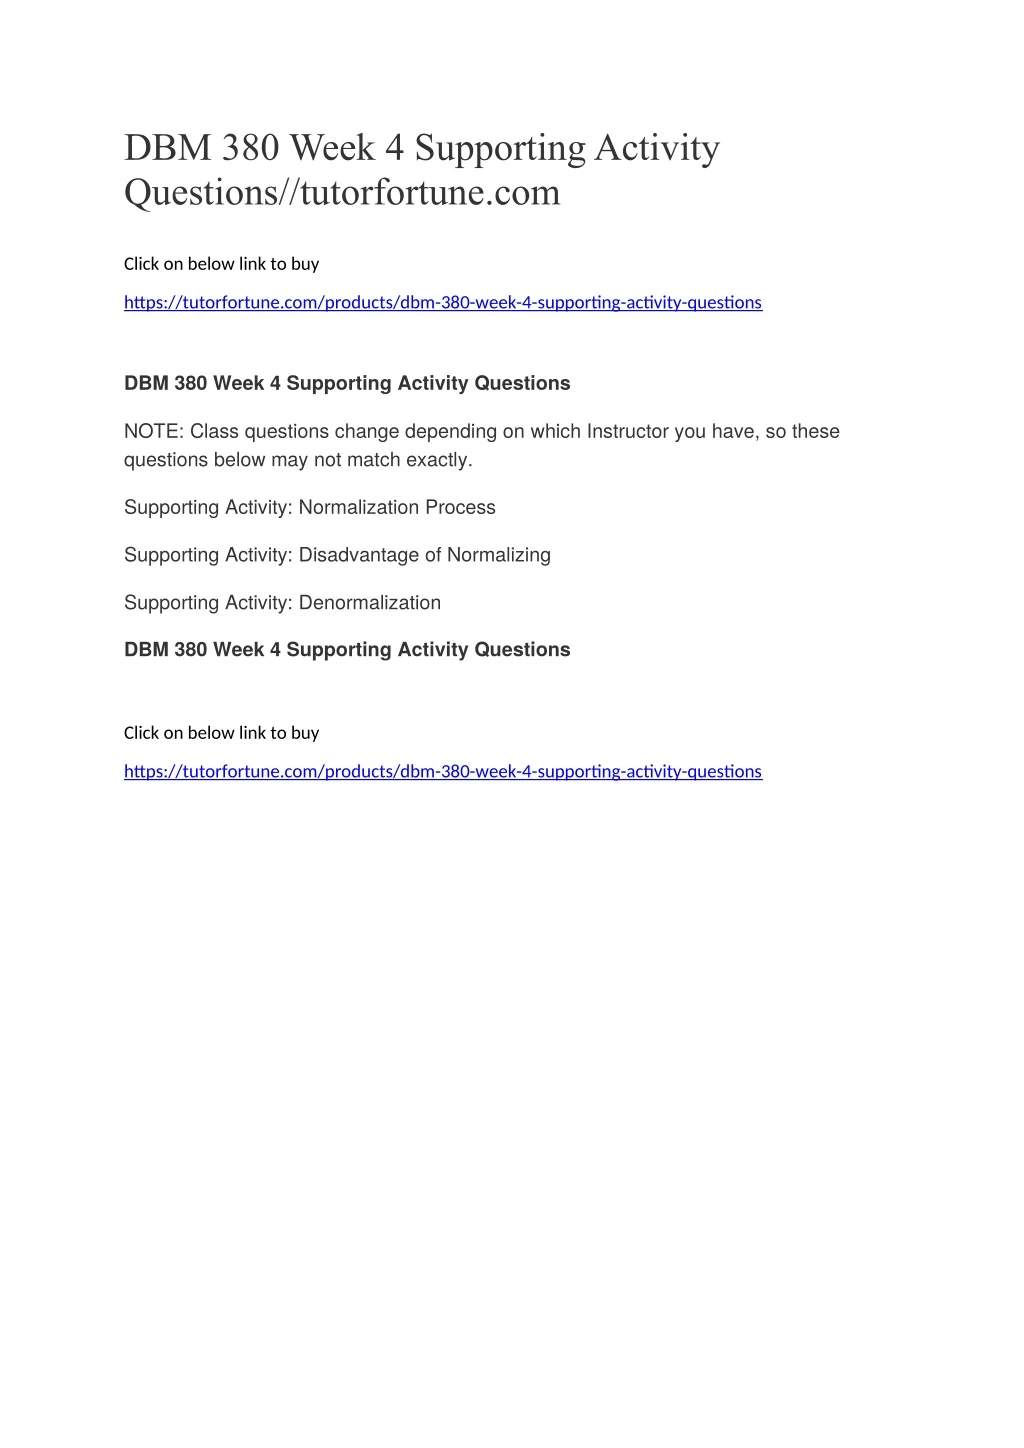 dbm 380 week 4 supporting activity questions